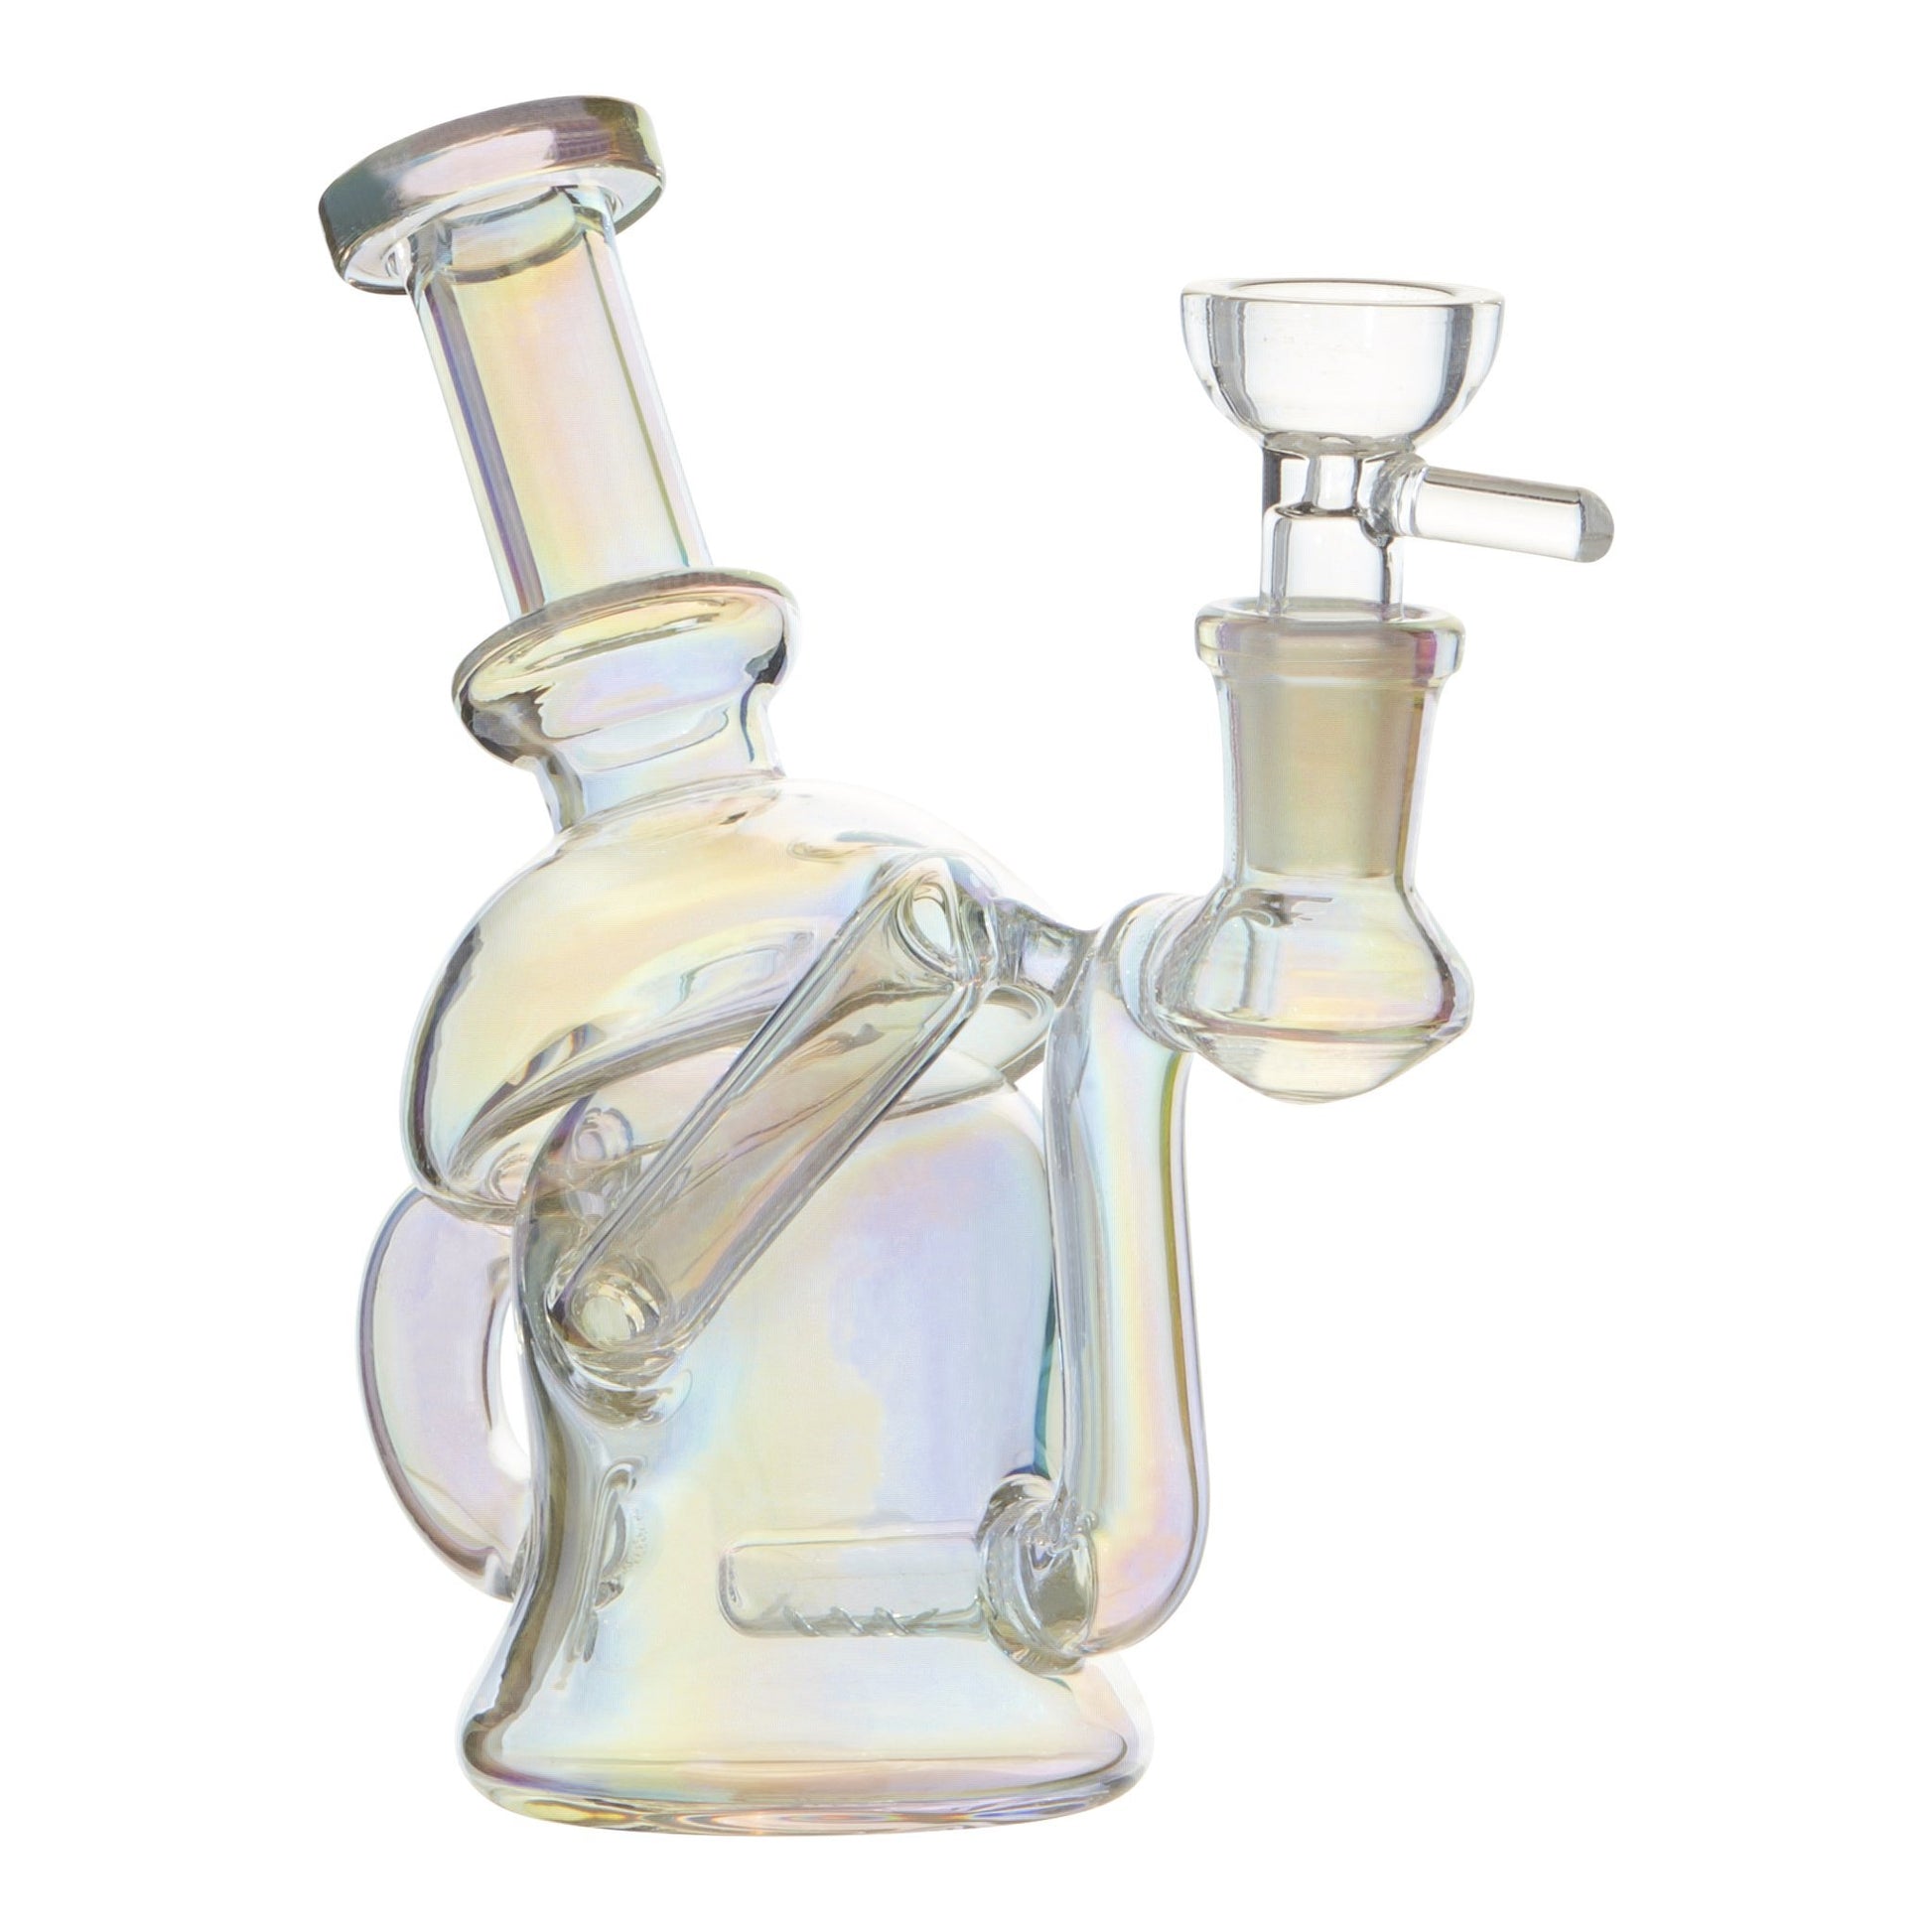 Slightly frontal full shot of 6-inch glass multichambered rainbow color bong smoking device mouthpiece facing left